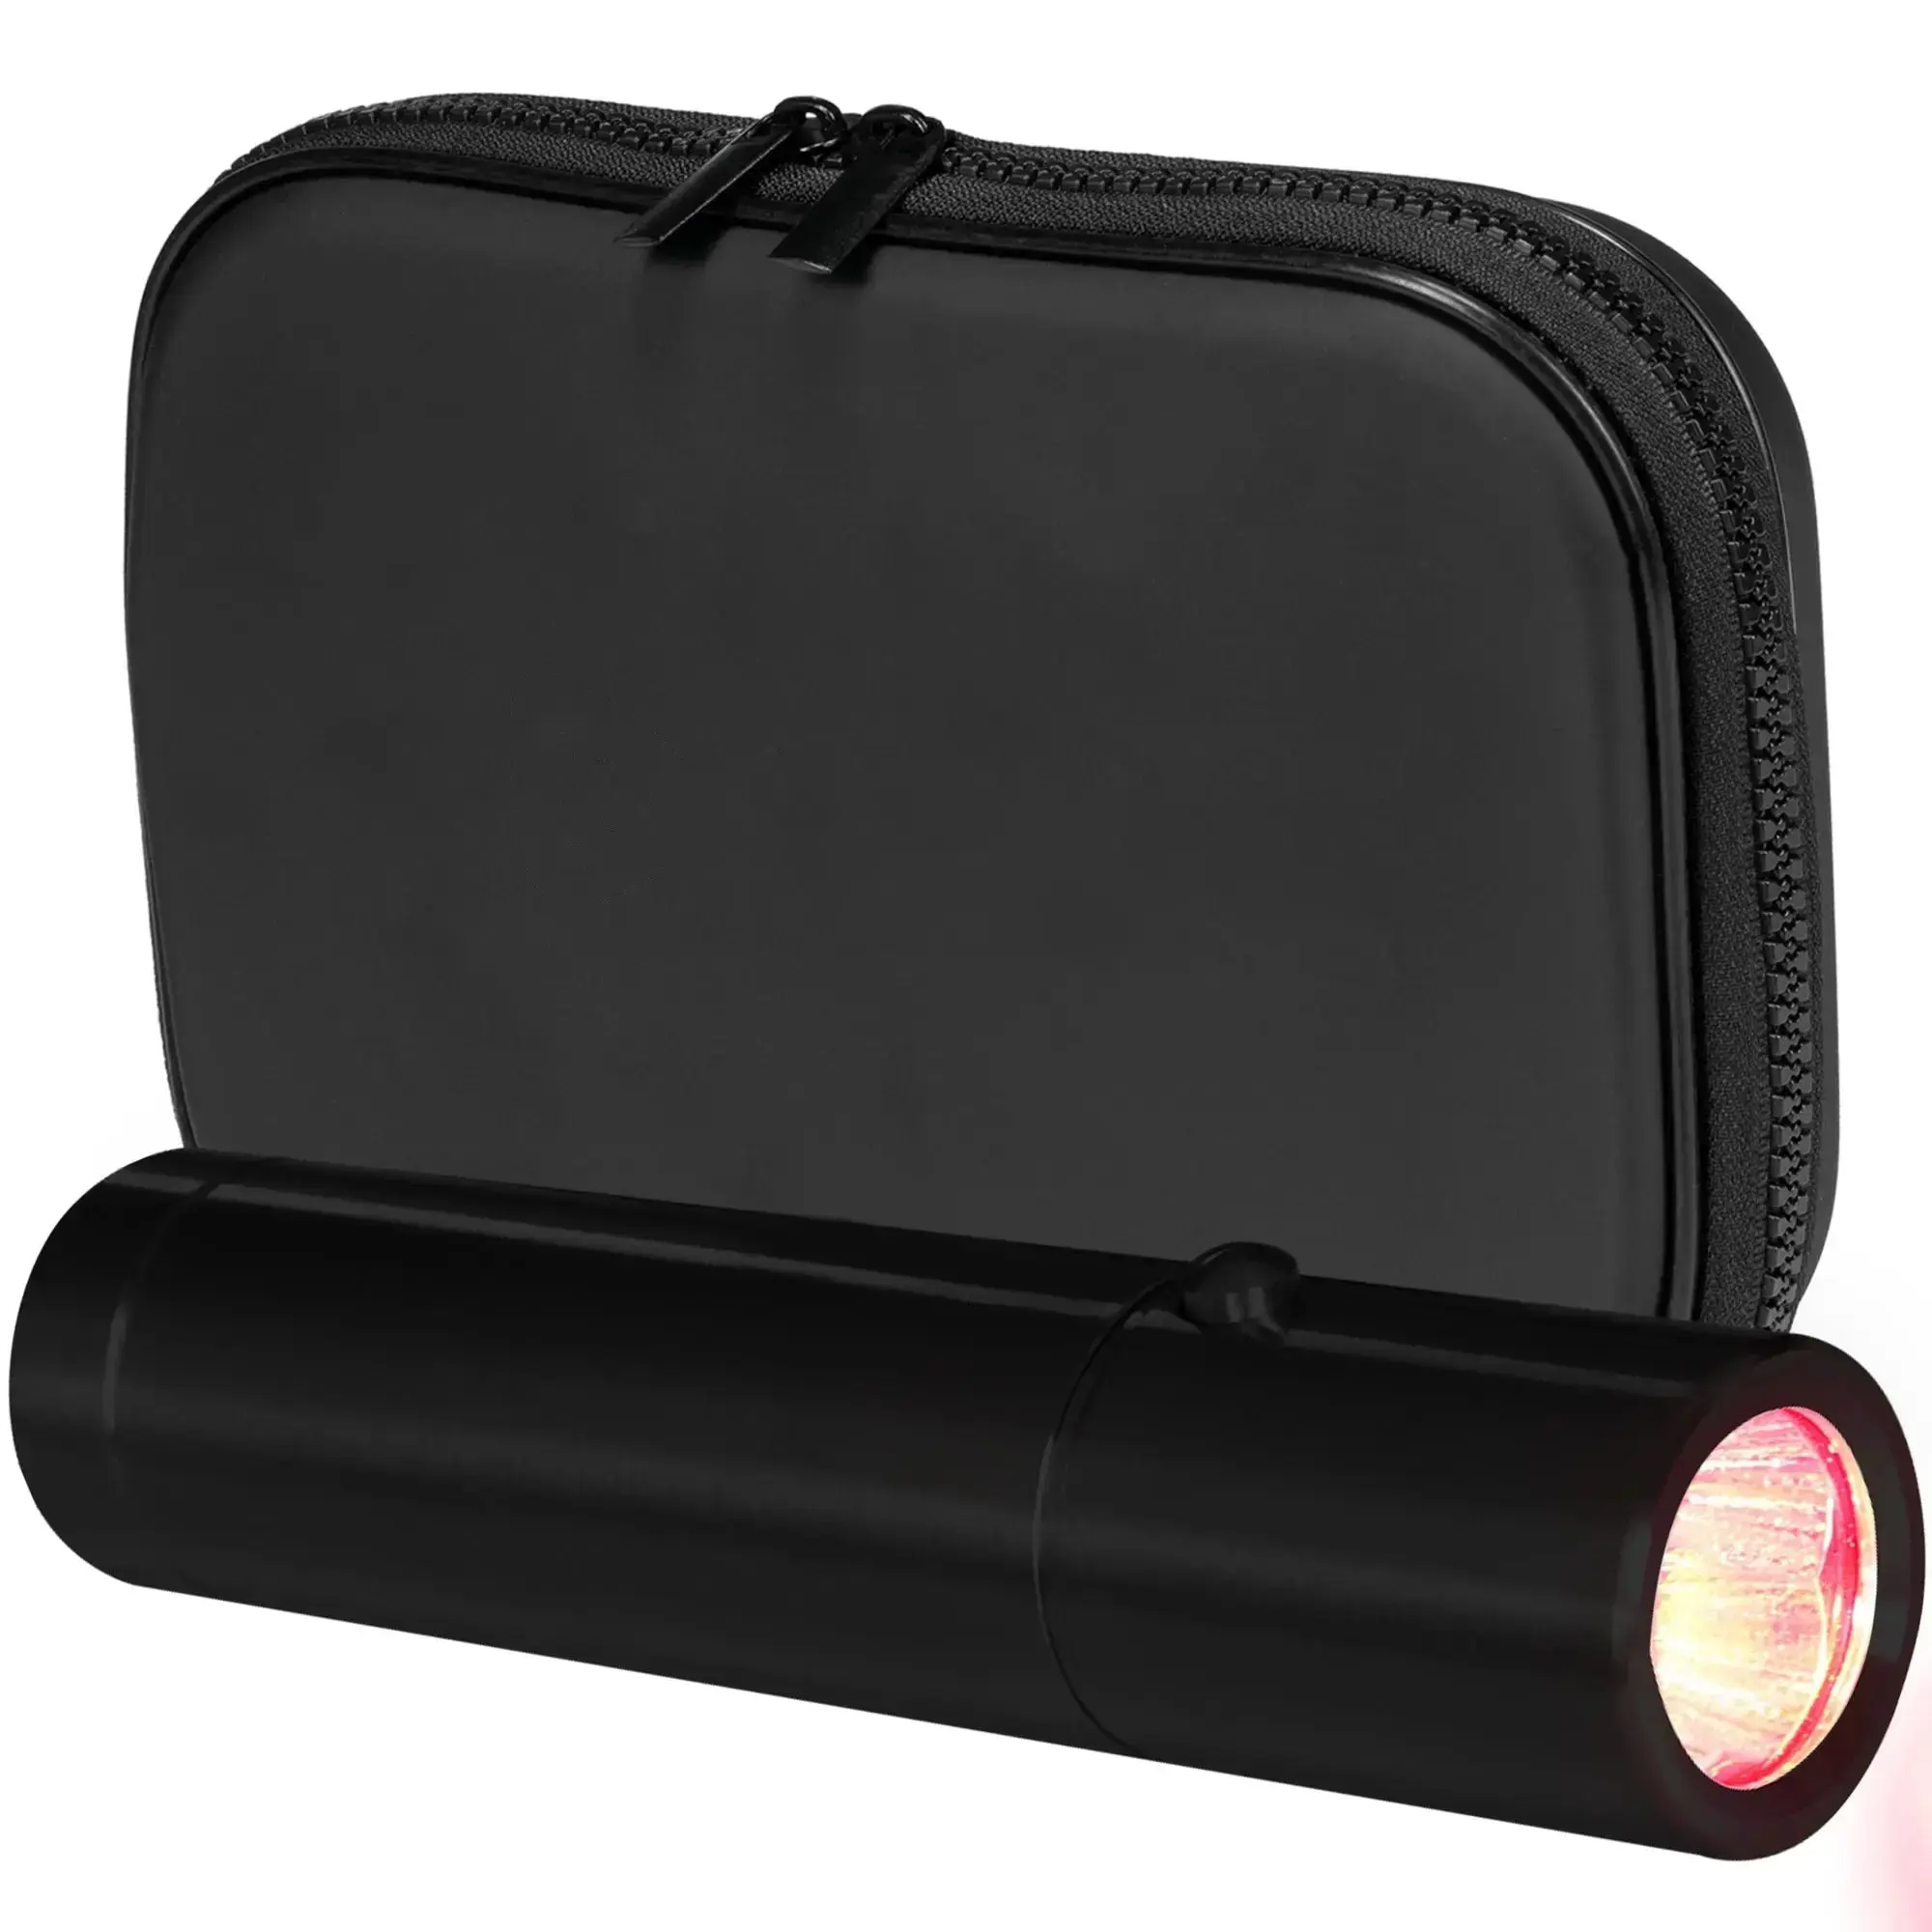 Portable Handhold Infrared And Red Light Therapy Torch Pain With 3 Therapeutic Colors For Reducing Inflammation